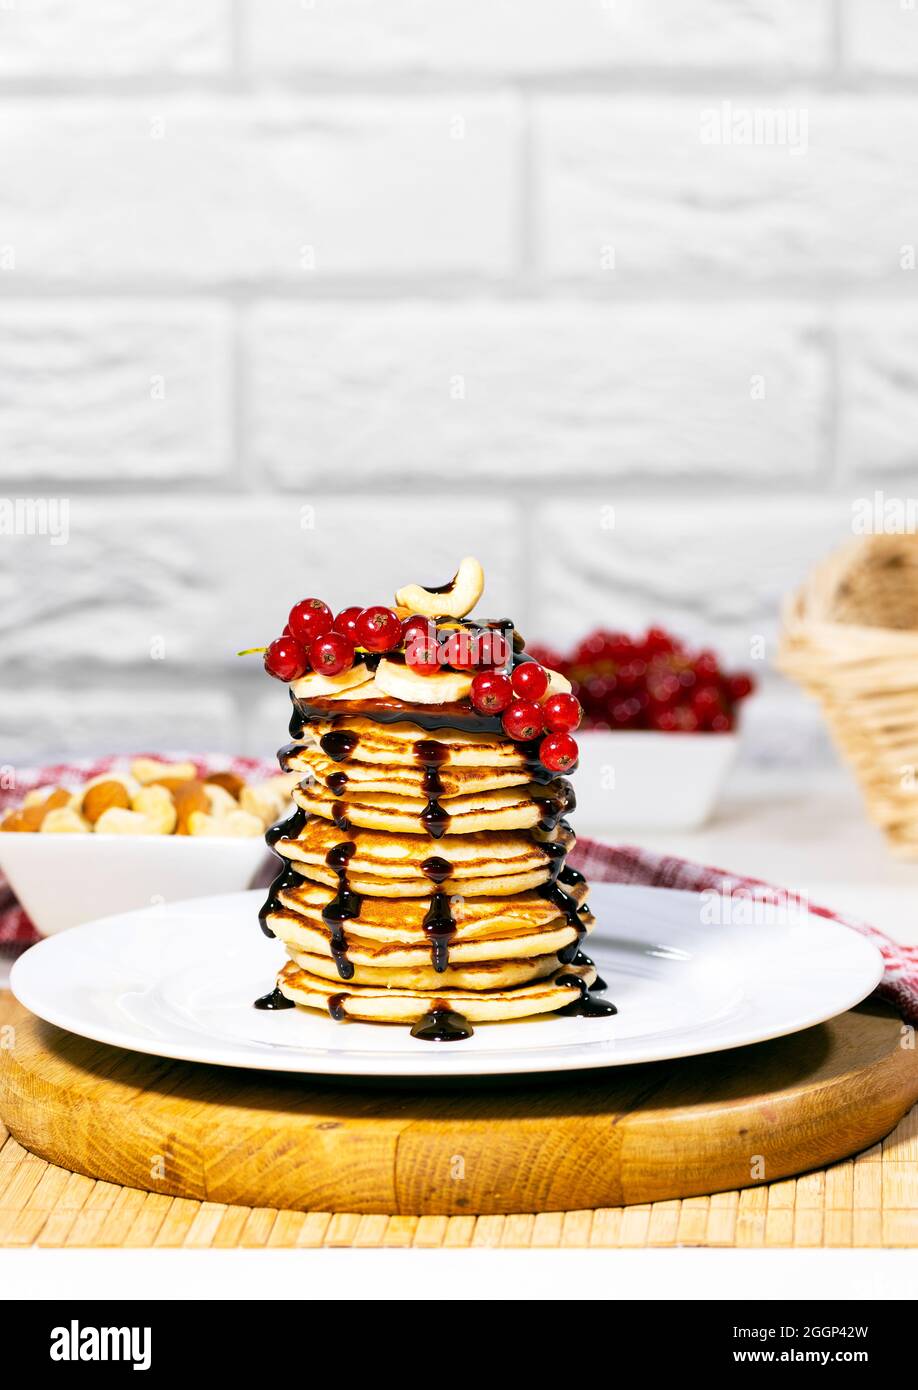 Pancakes With banana, nuts and red currant on white background, Traditional American Breakfast, Copyspace, Vertical Resolution Stock Photo